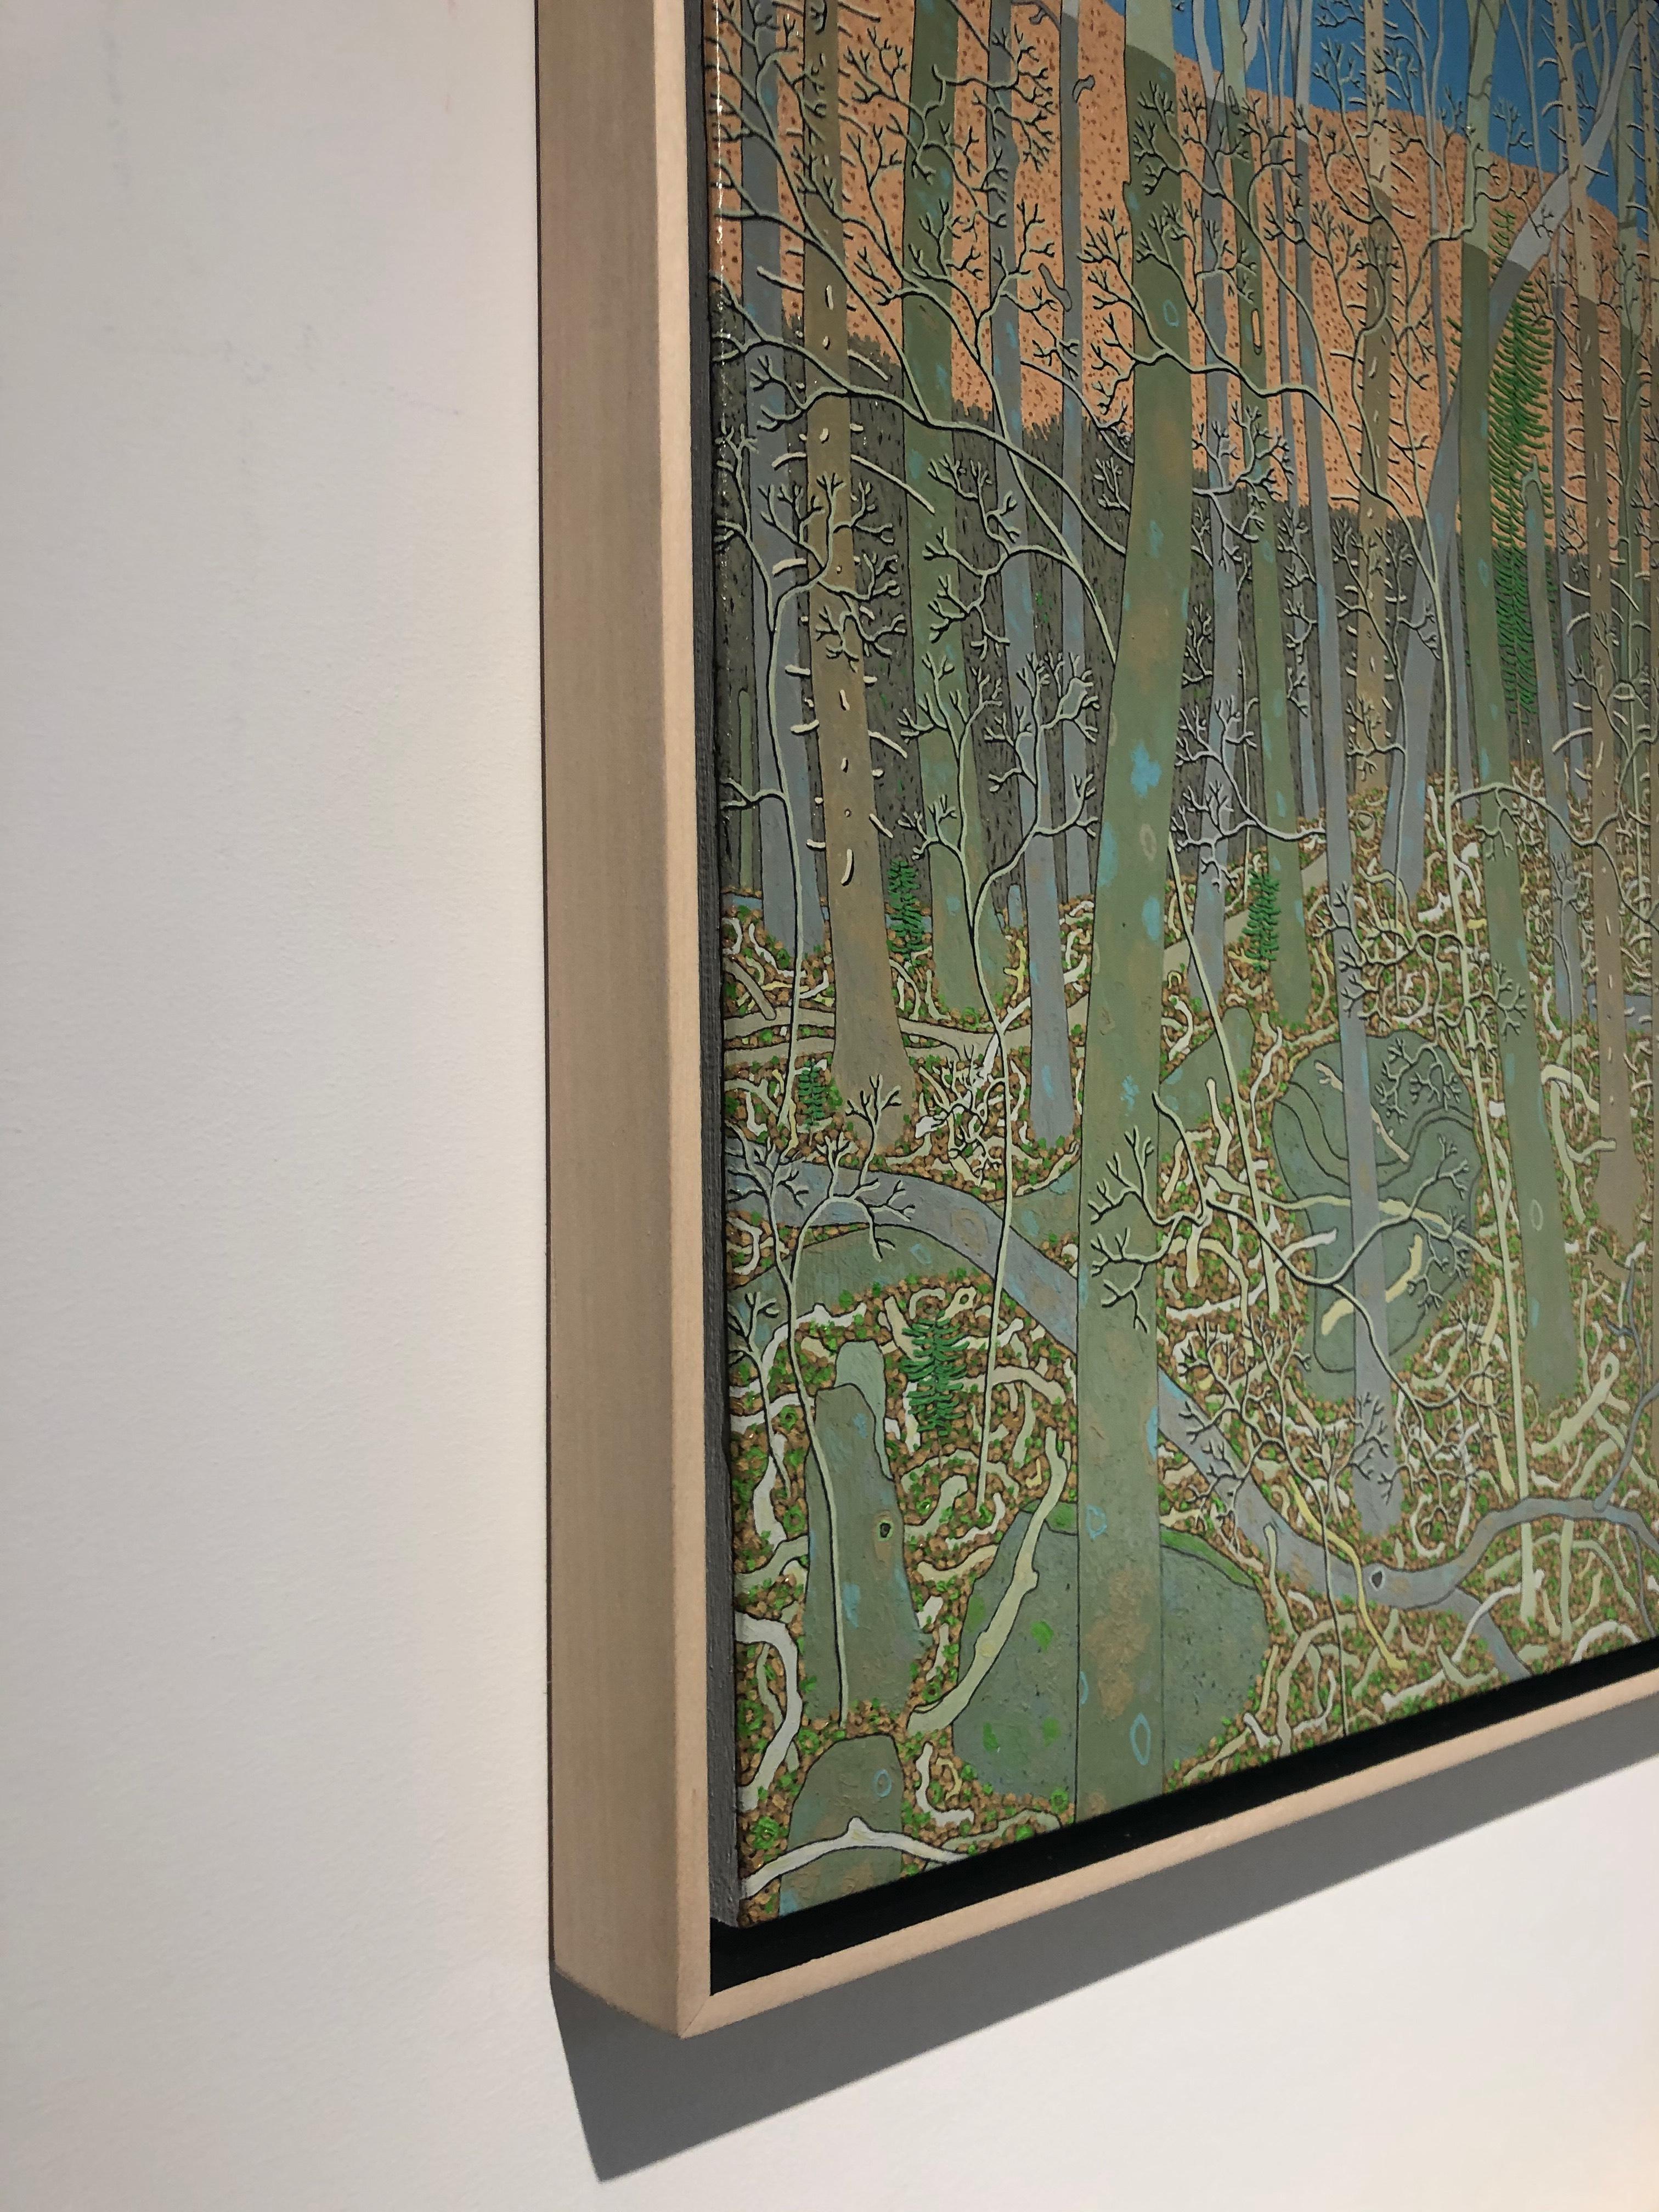 The densely treed forest and mountain ledges of Hennen's Virginia home are the subject for this rich, highly detailed landscape painting. Recording the changing light's ridge shadow over the distant mountain. The many shades of green, blue and pale